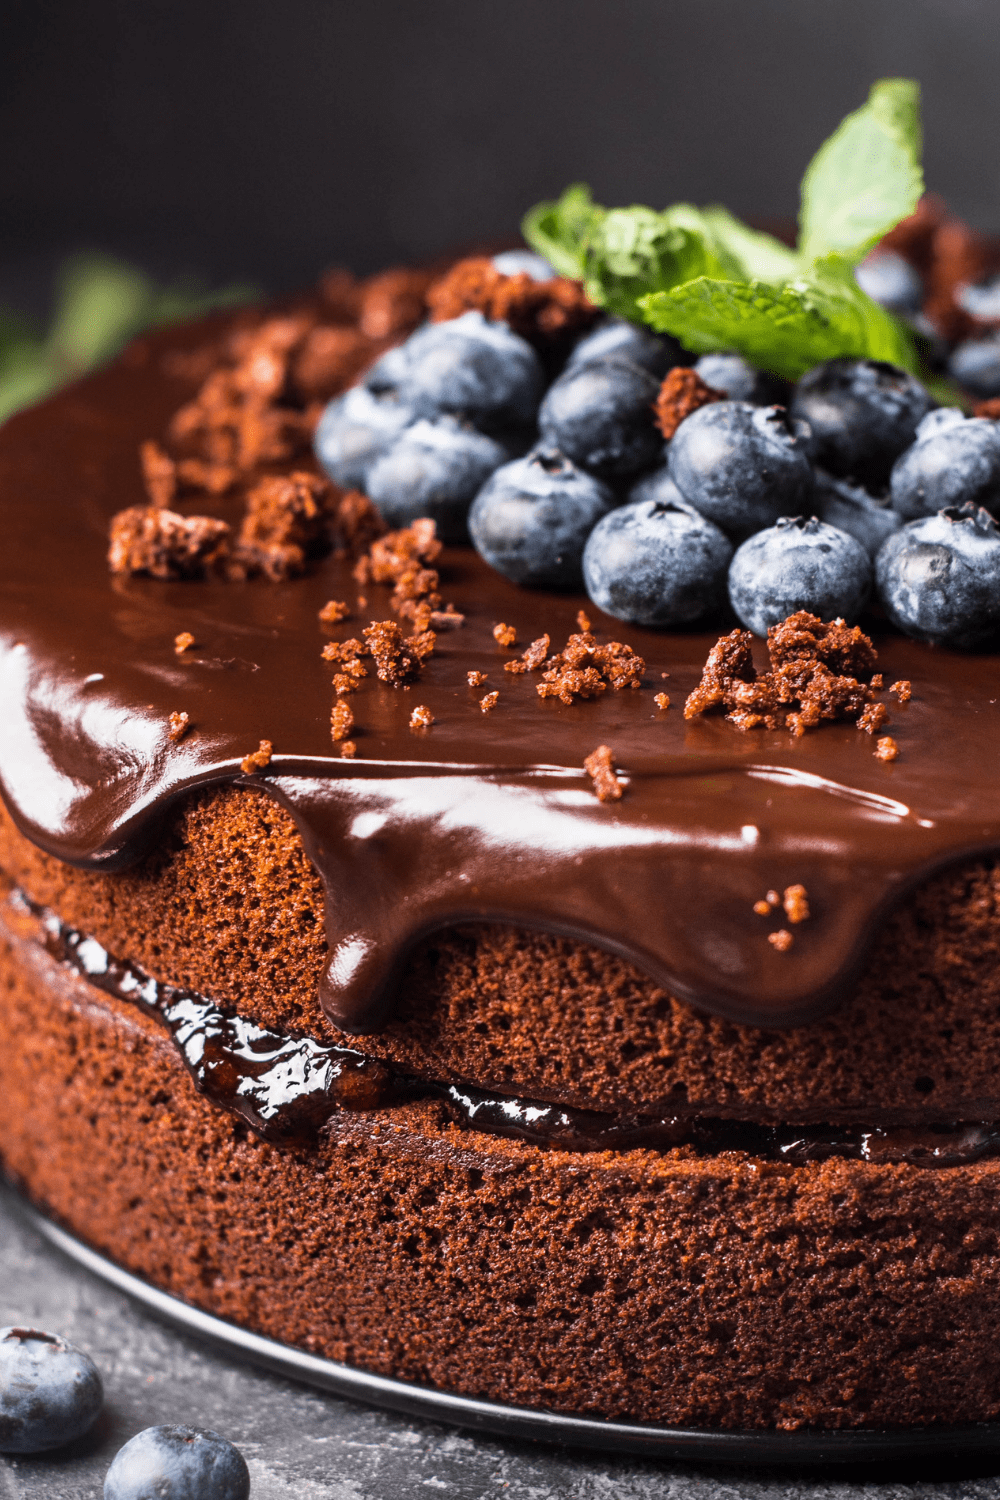 Chocolate Cake with Berry Toppings